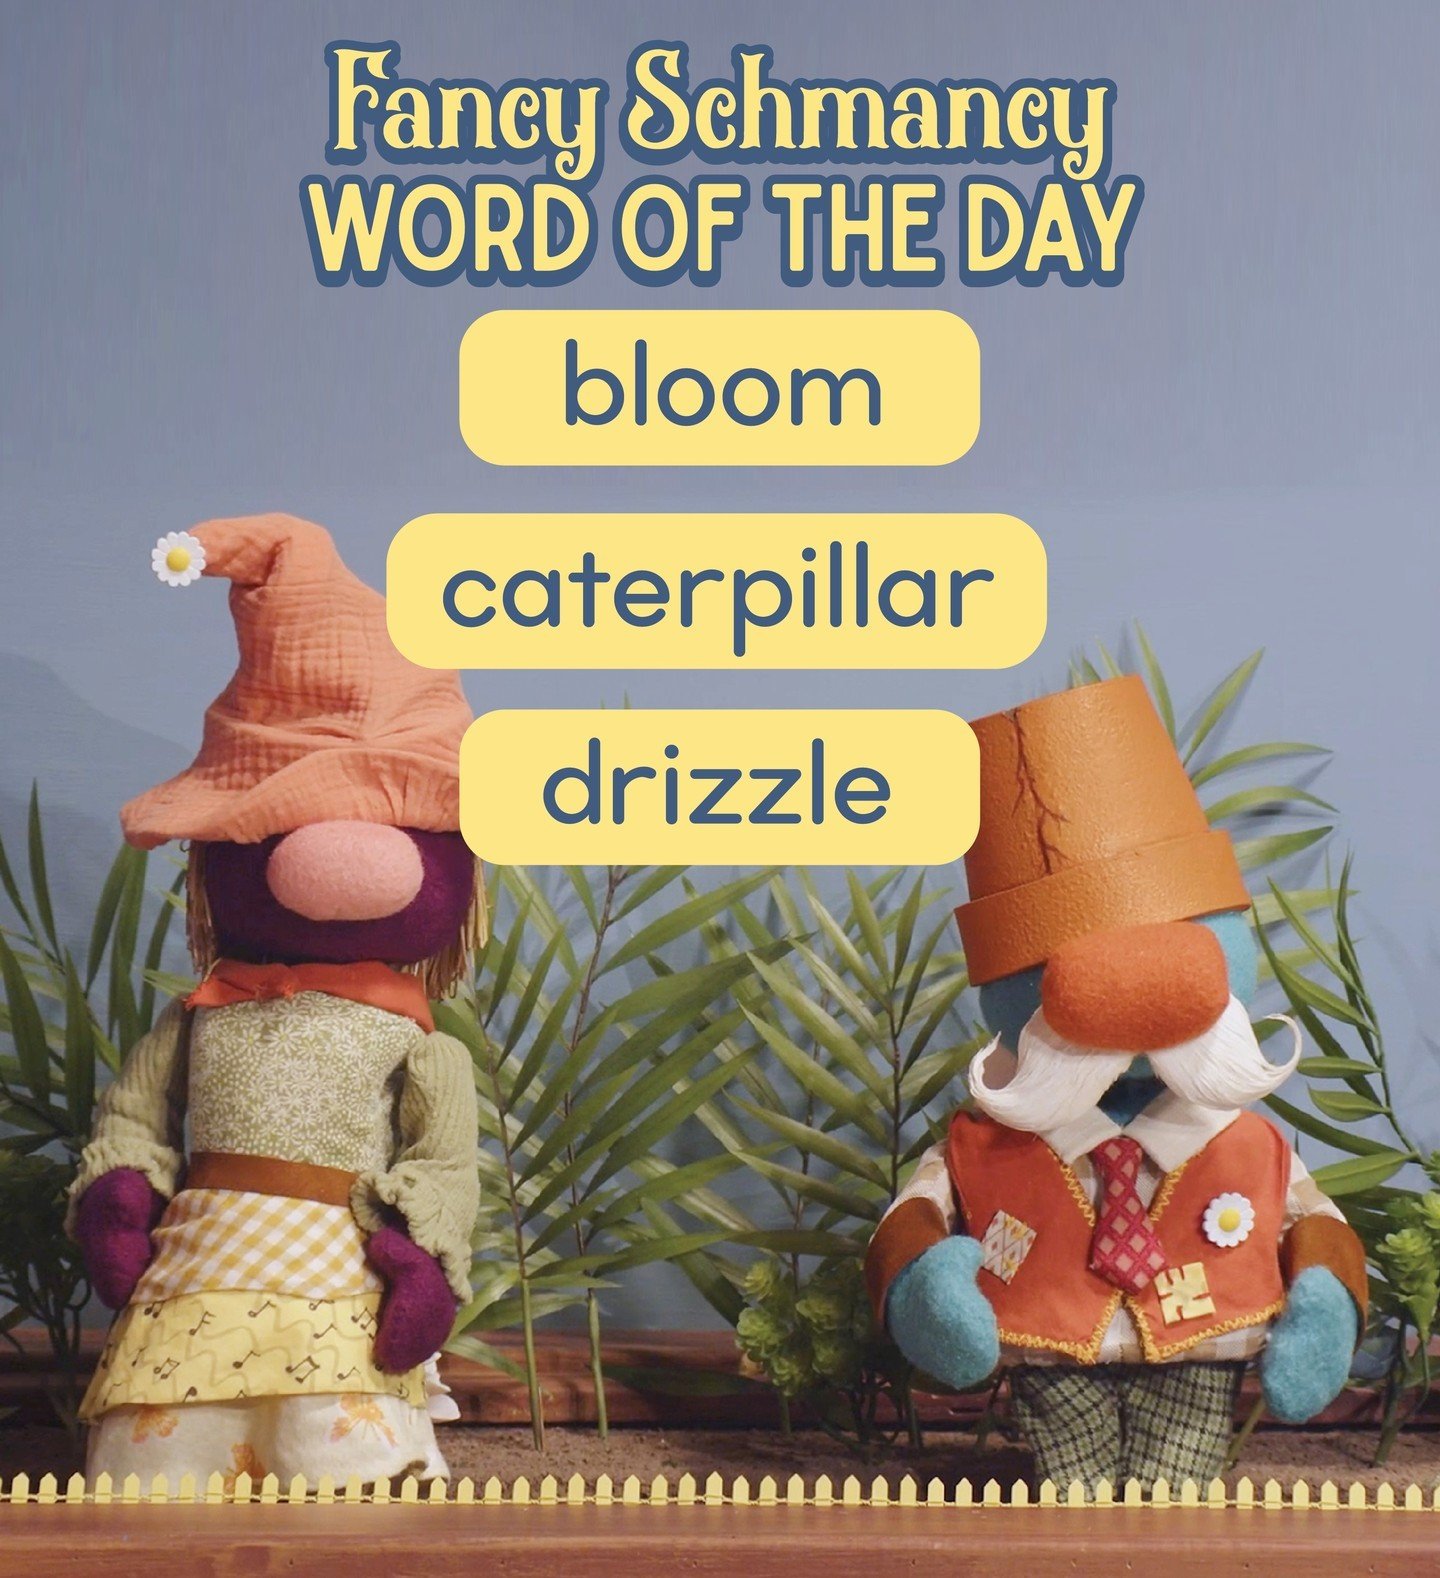 Spring is in the air, and fancy schmancy springtime words are on Mary and Marty&rsquo;s minds! What are some of your kids&rsquo; favorite fancy schmancy words?
Check out episodes of Reading Buddies on YouTube or on your local PBS station.
#readingbud